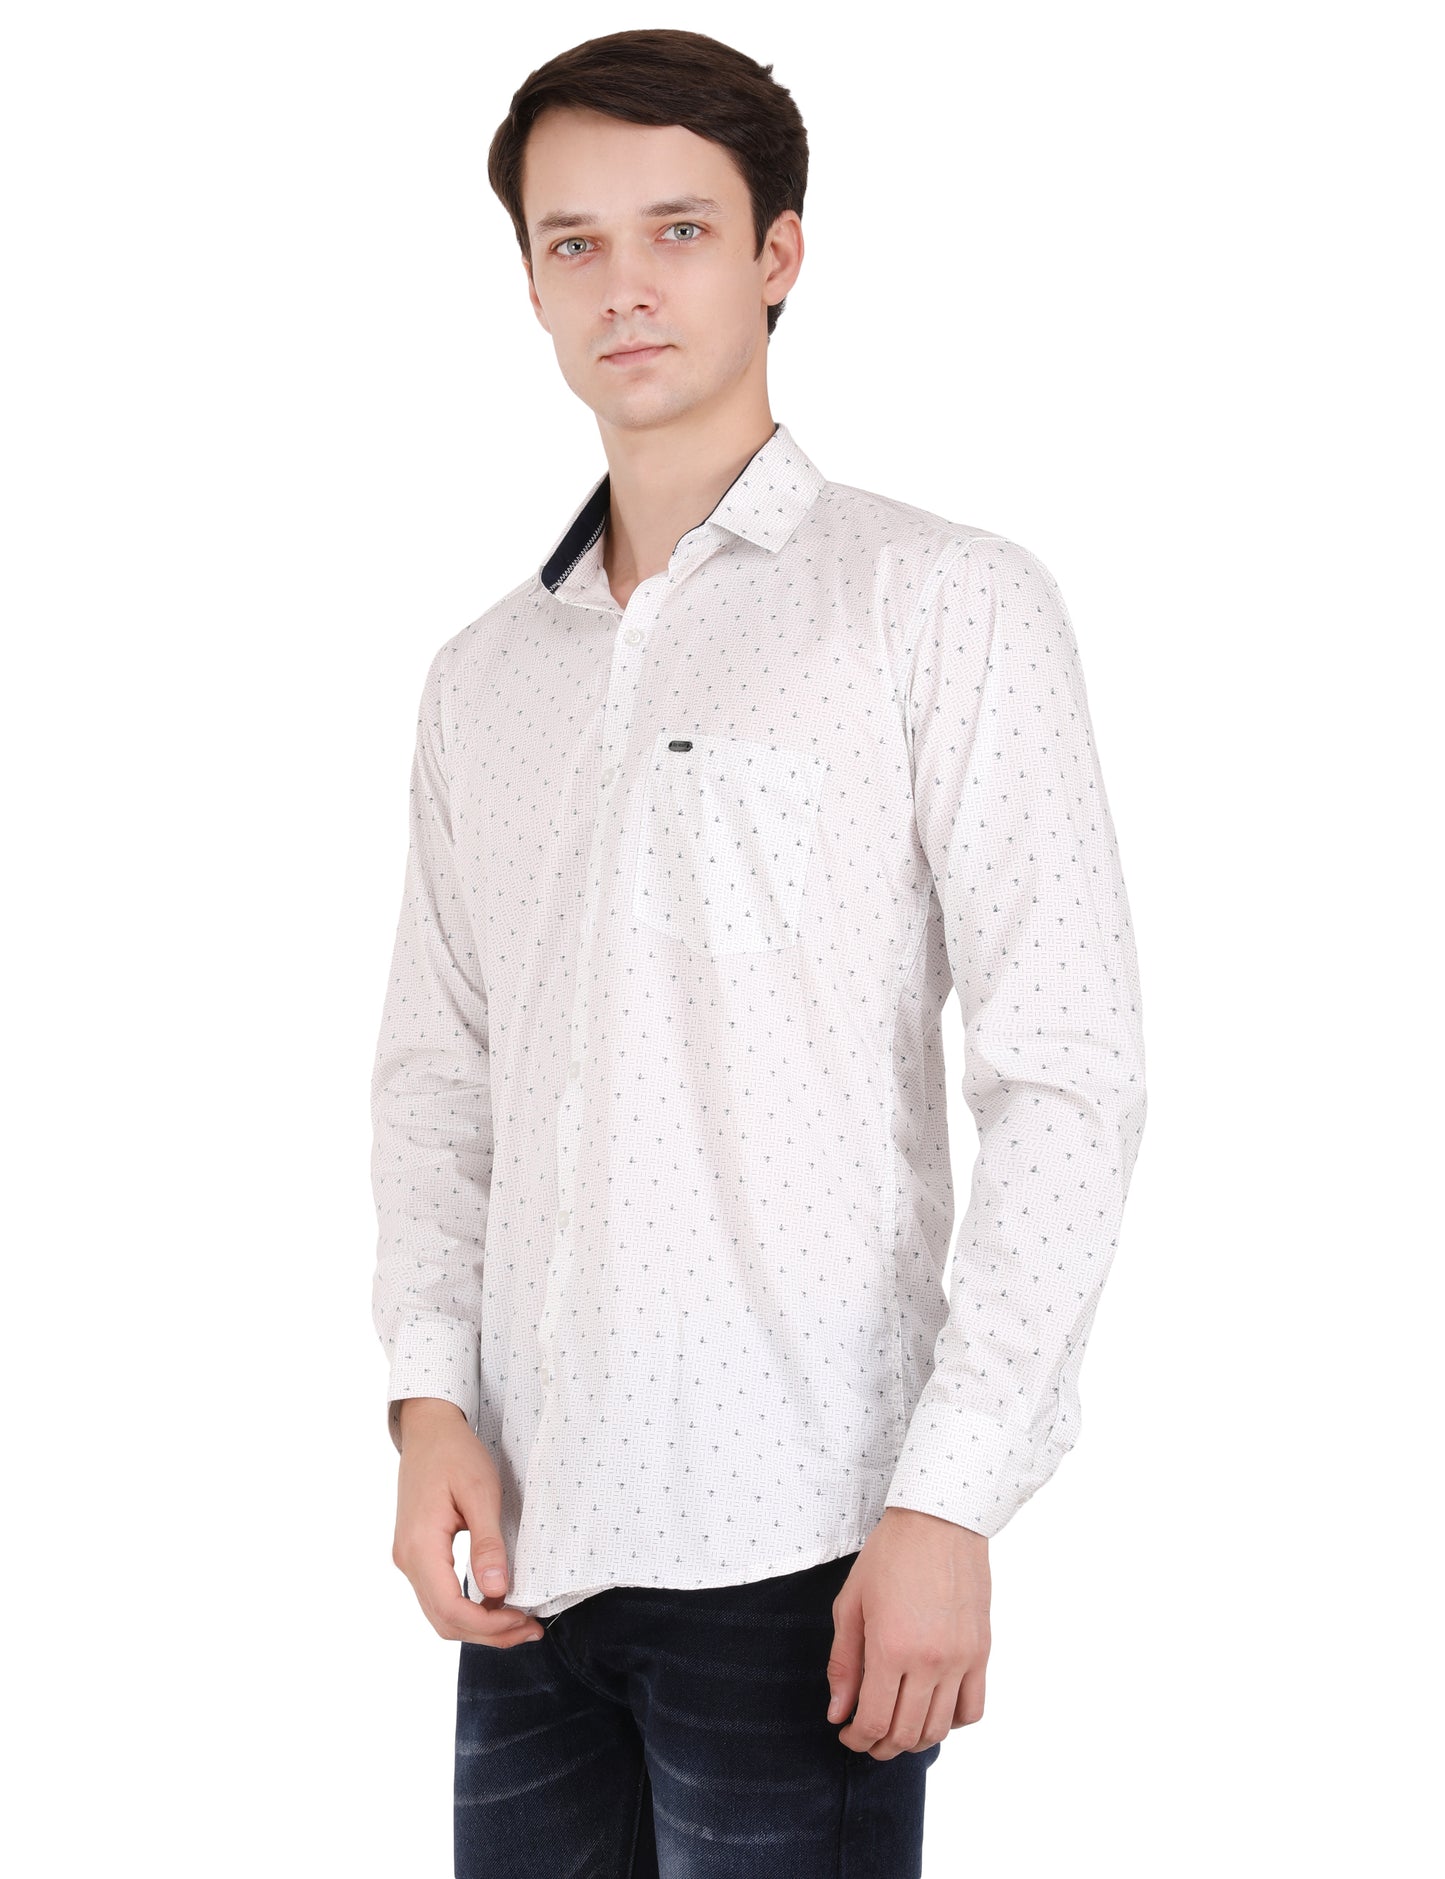 Classic Charm: Printed White Shirt with Blue Pattern